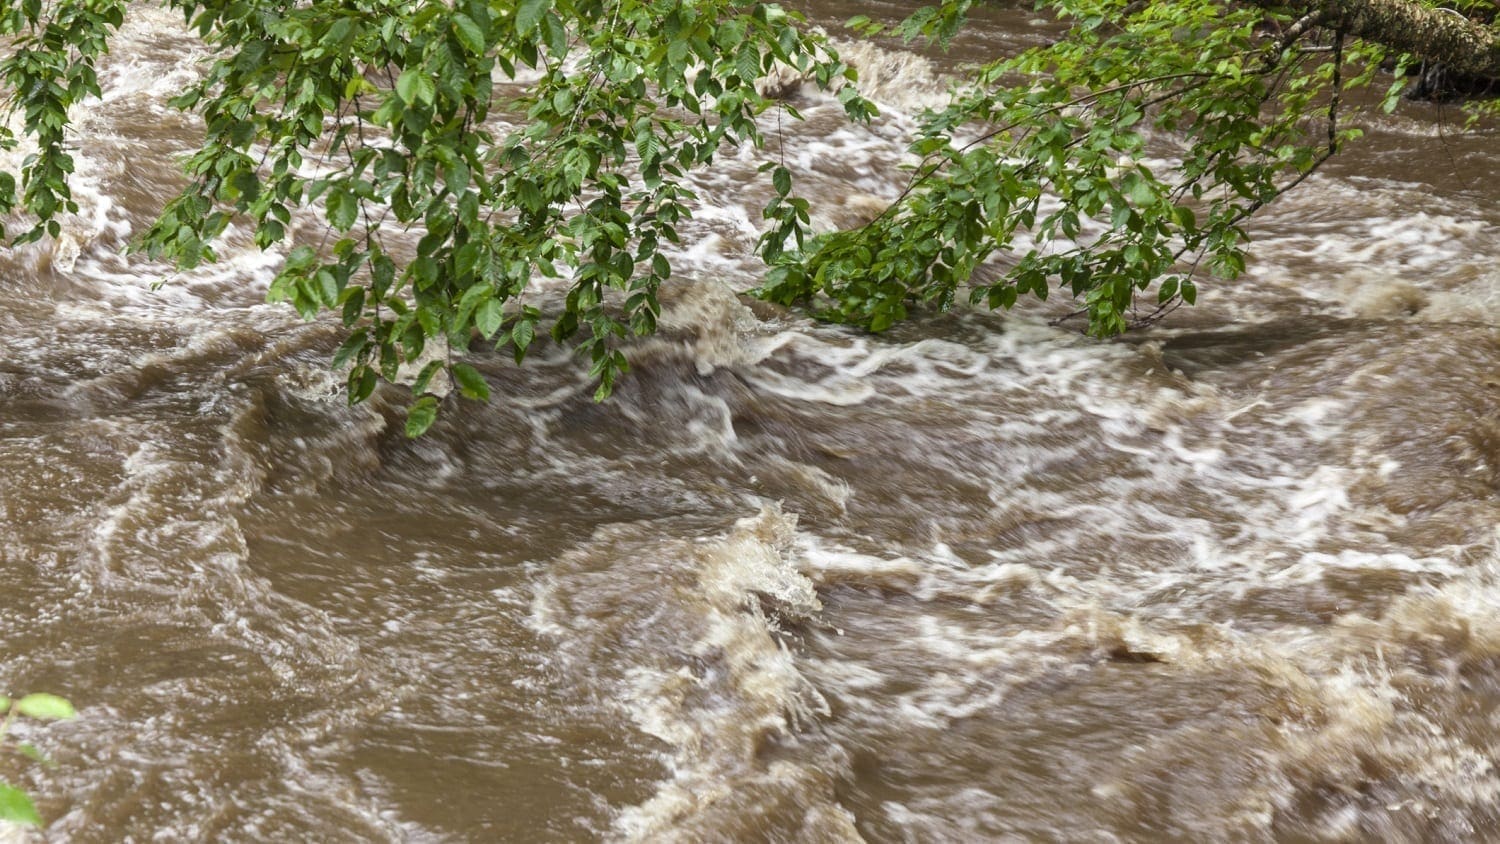 Flood waters swirling around a tree's branches: ID 126789221 © Mothy20 | Dreamstime.com